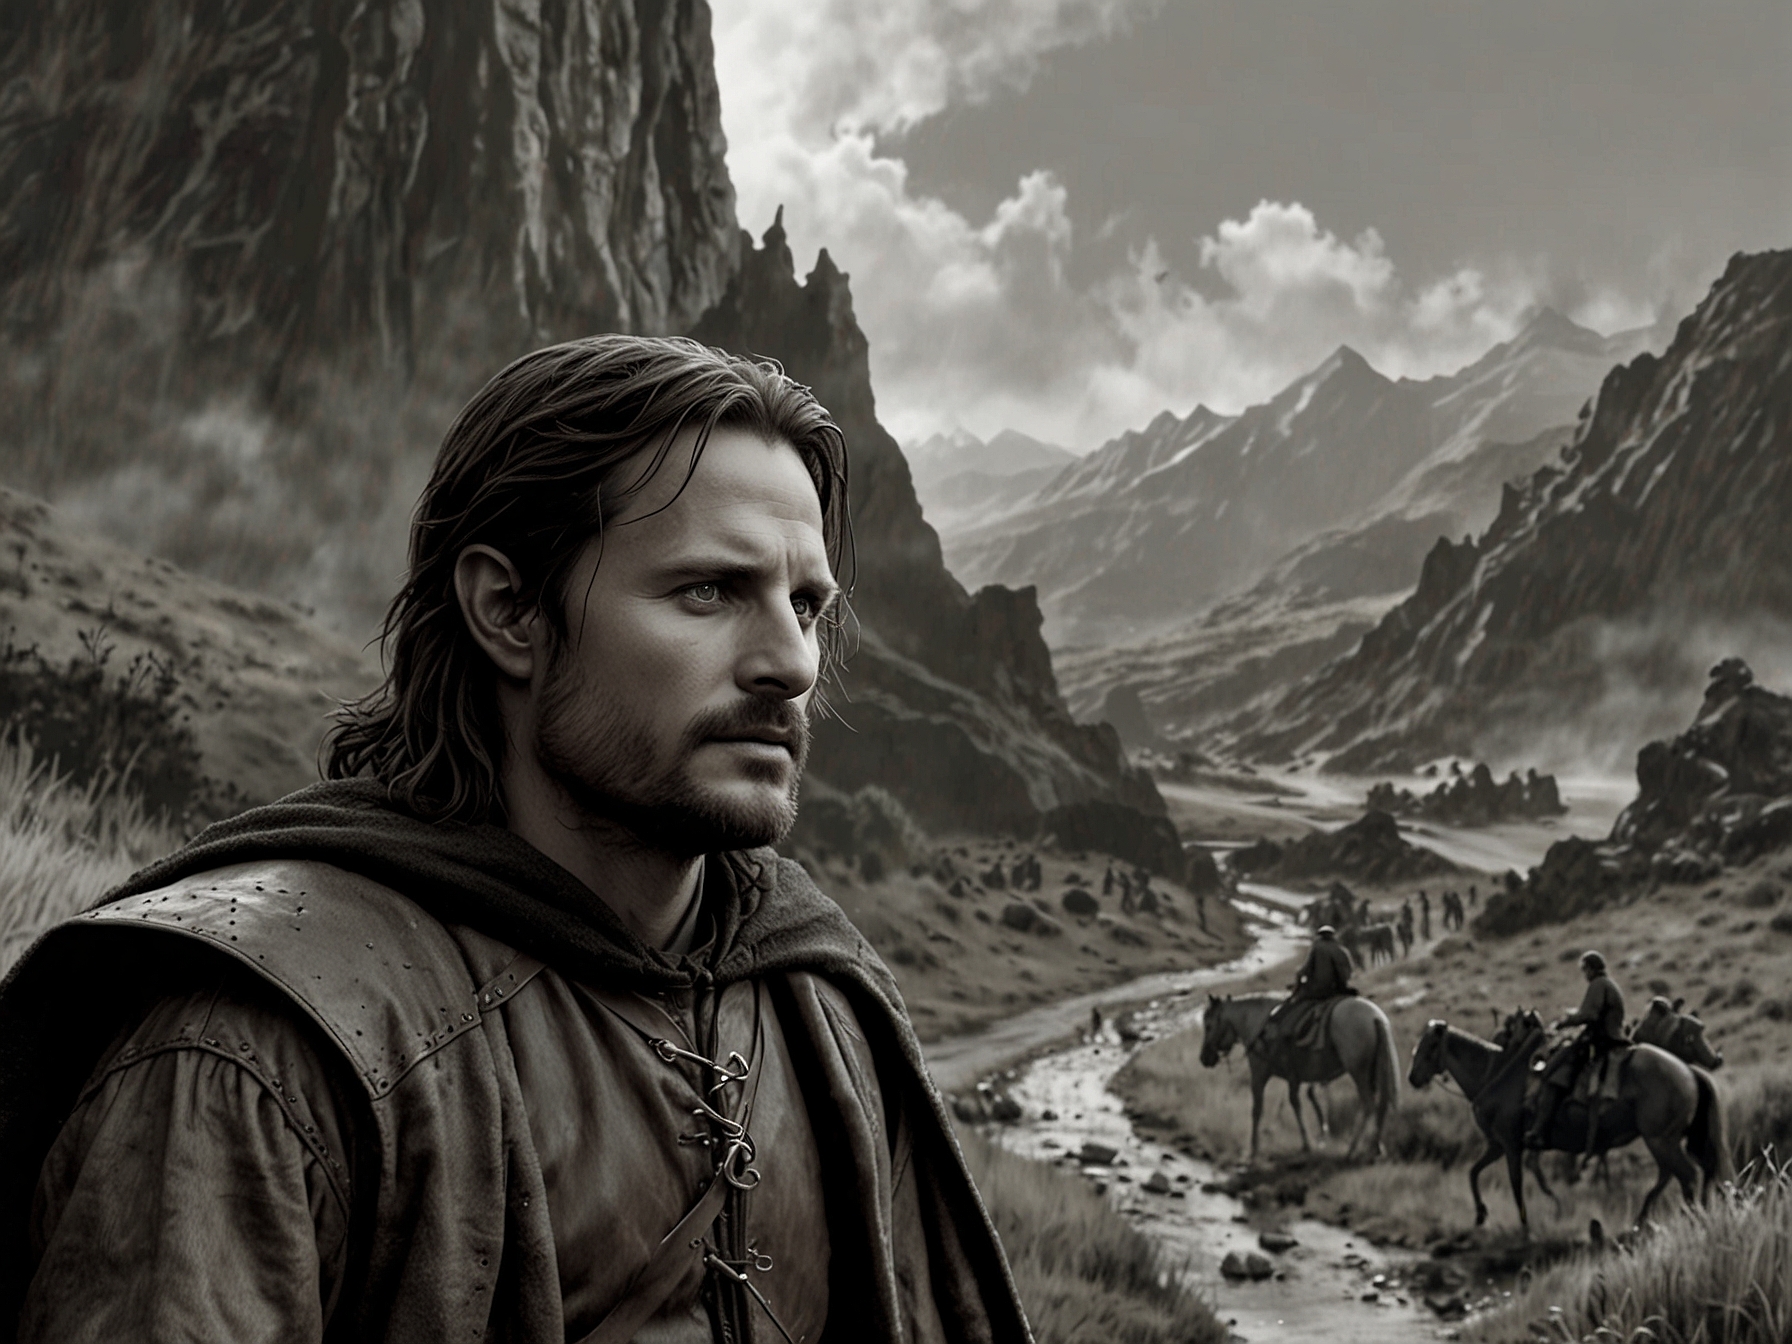 A scene from 'The Lord of the Rings' with Viggo Mortensen as Aragorn; he replaced Stuart Townsend who was deemed too young for the role, illustrating how creative decisions shape iconic characters.